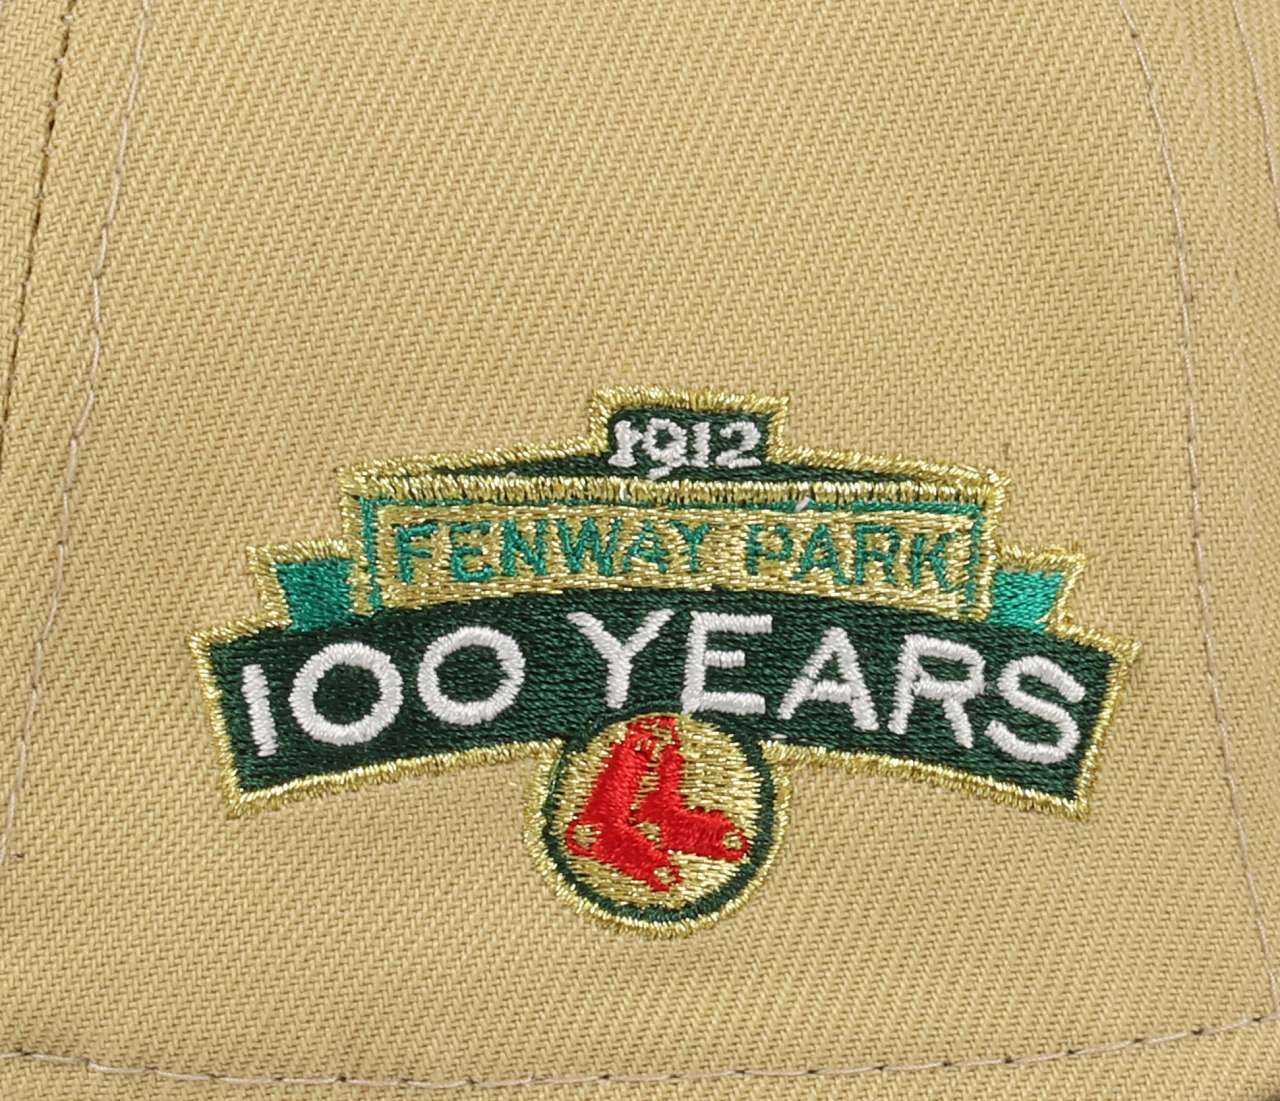 Boston Red Sox MLB 100 Years Fenway Park Sidepatch Vegas Gold Black 9Forty A-Frame Snapback Cap New Era